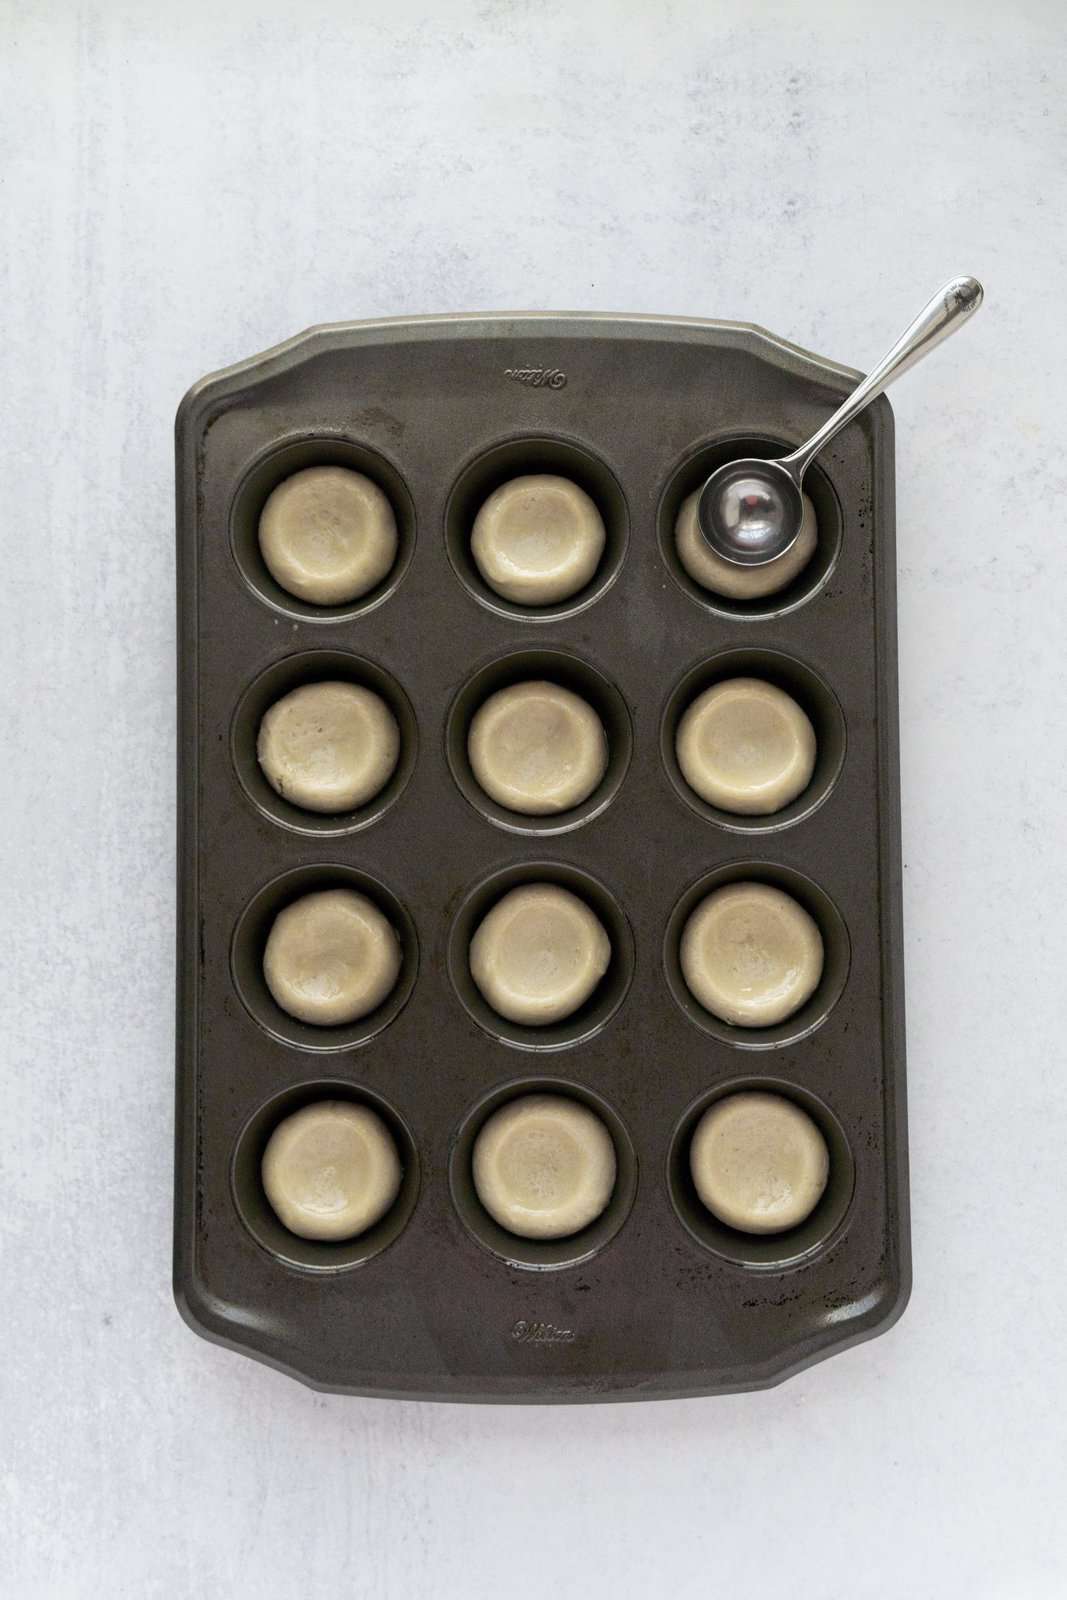 Cookie dough added to mini muffin tin with measuring spoon pressing down depressions in dough.